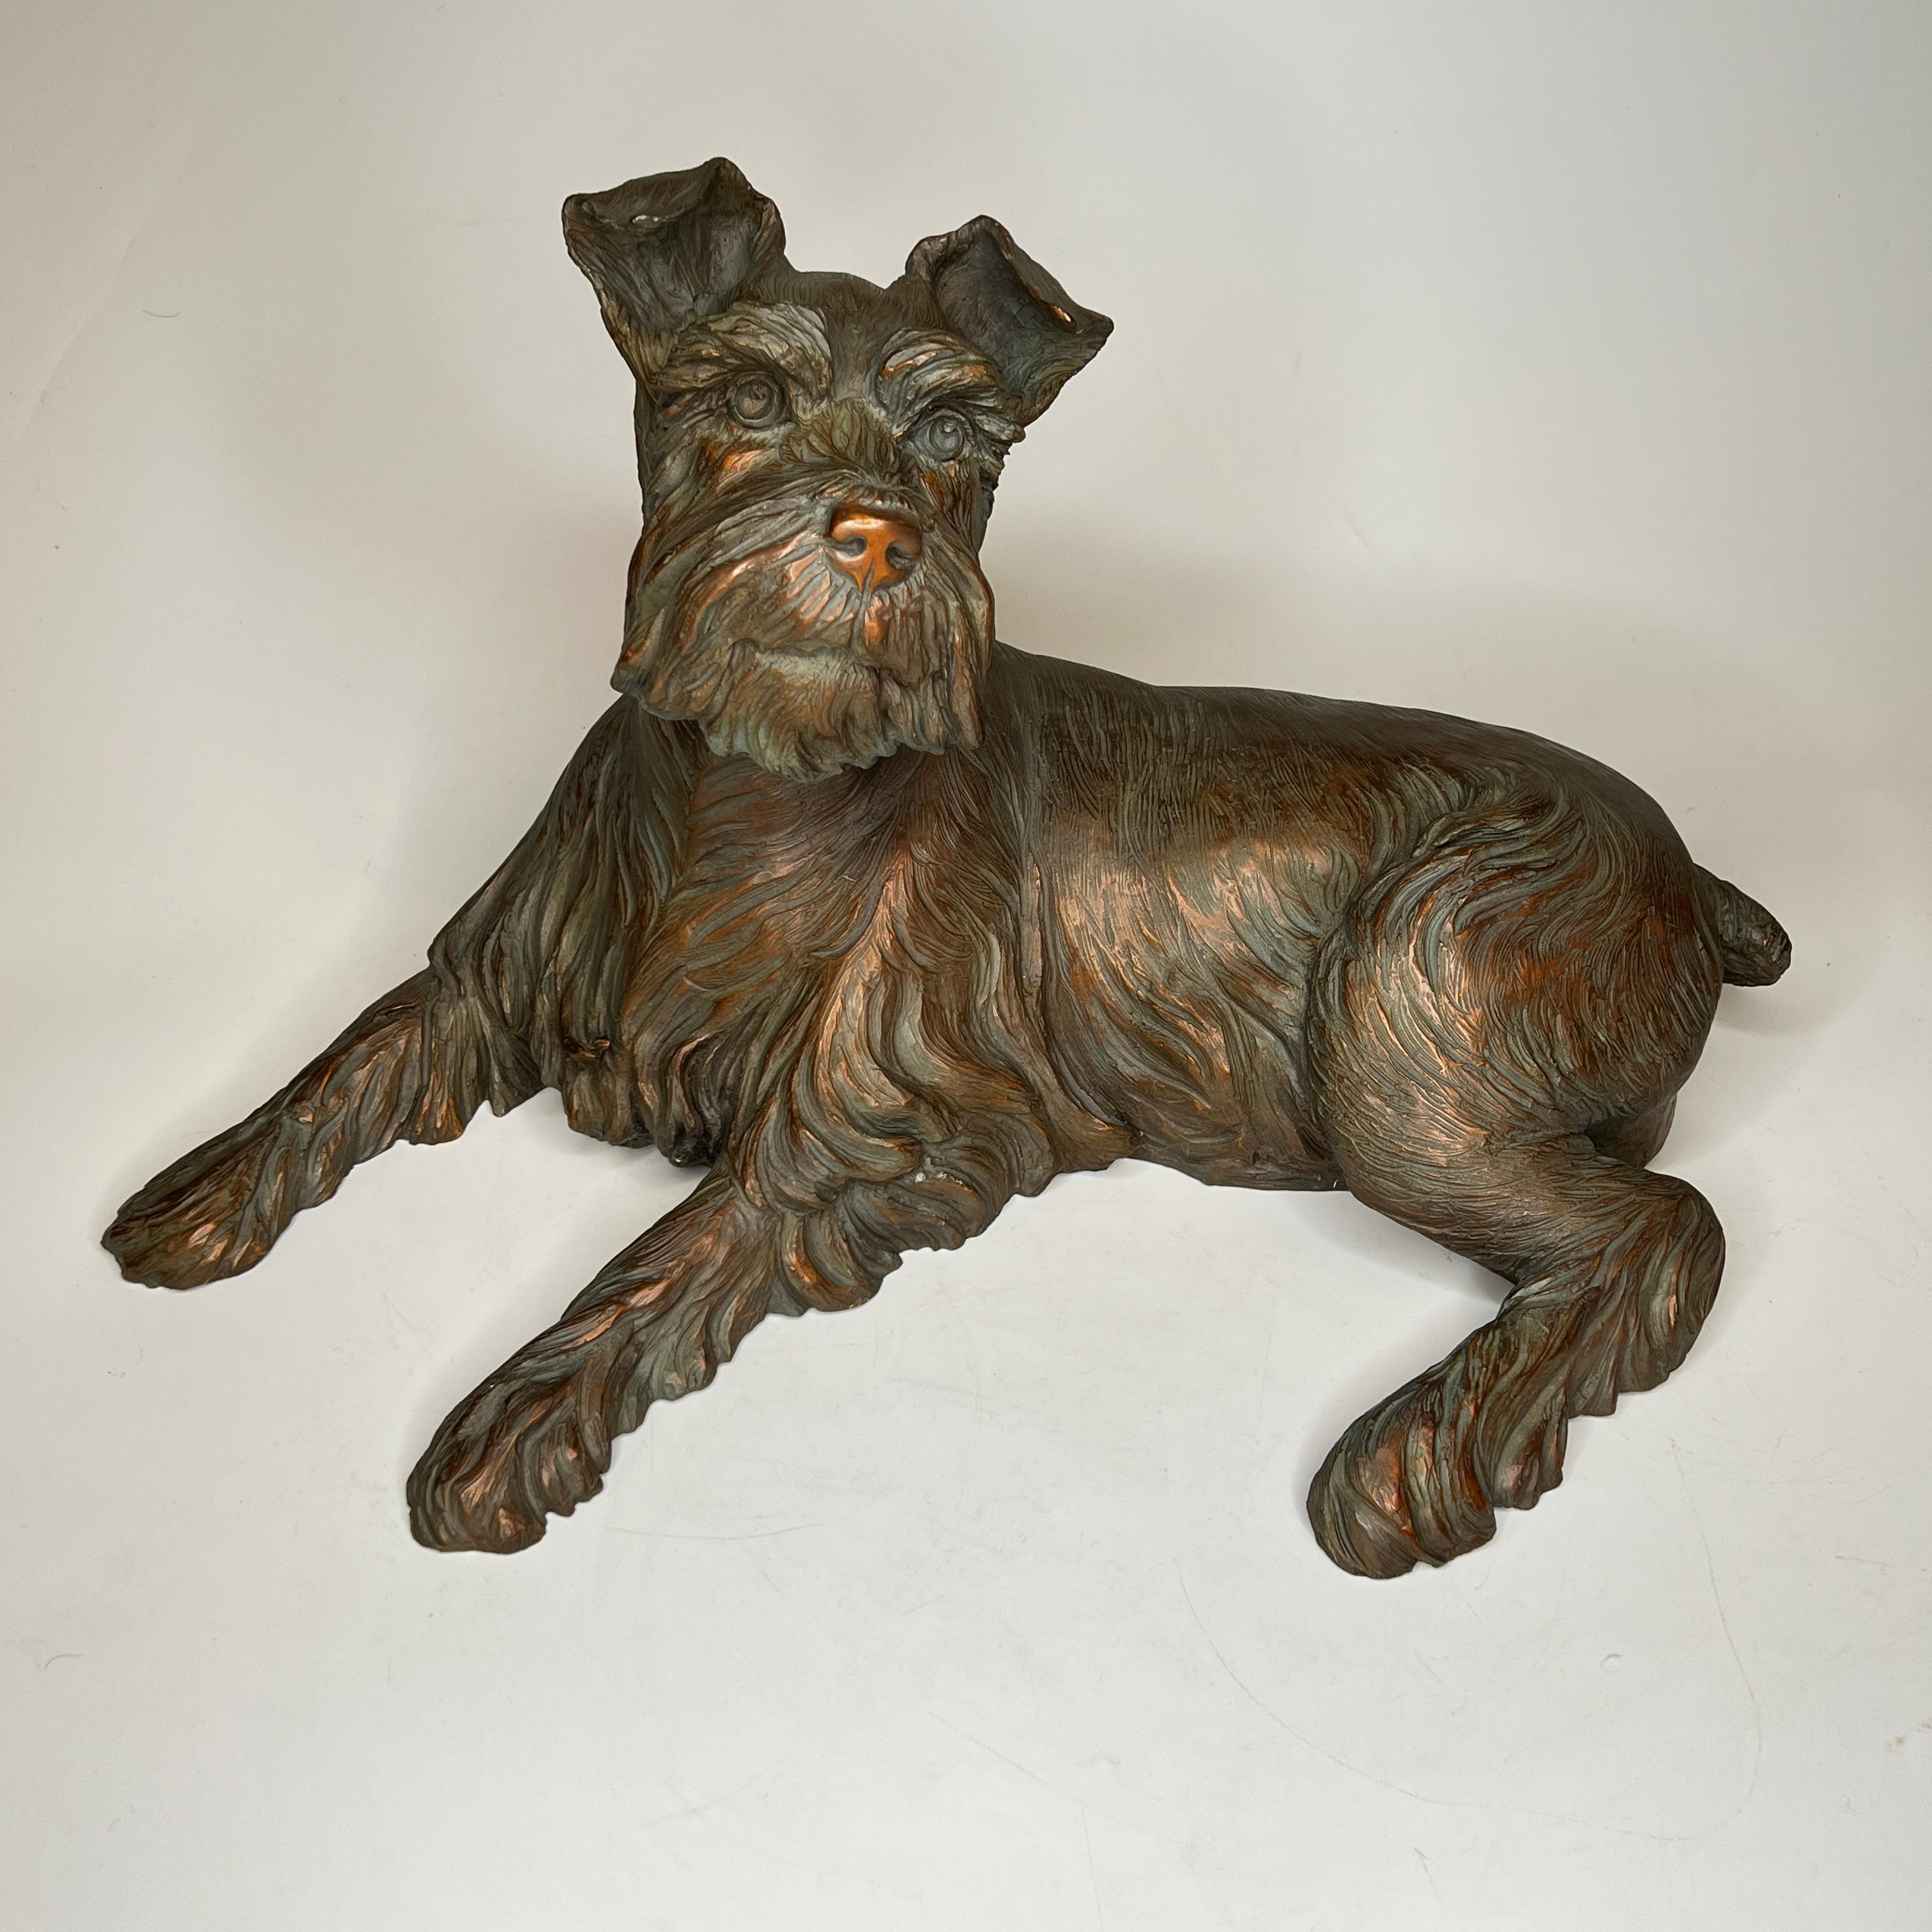 Jack Russell Terrier patinated bronze sculpture, signed G.L (or S.L.) Clark, 4/25, Santa Fe Bronze.